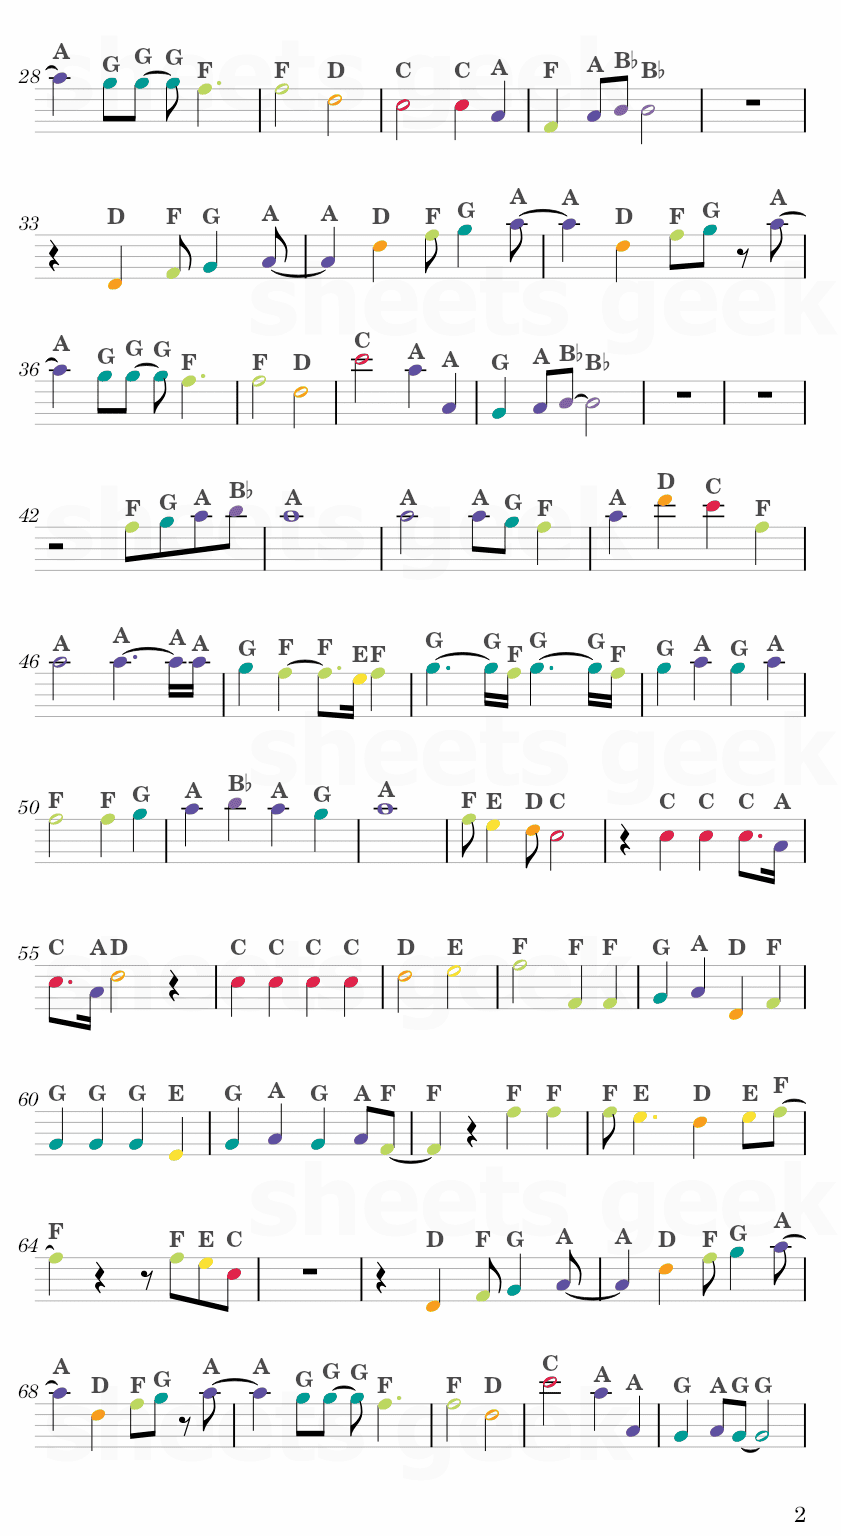 Mr. Blue Sky - Electric Light Orchestra Easy Sheet Music Free for piano, keyboard, flute, violin, sax, cello page 2